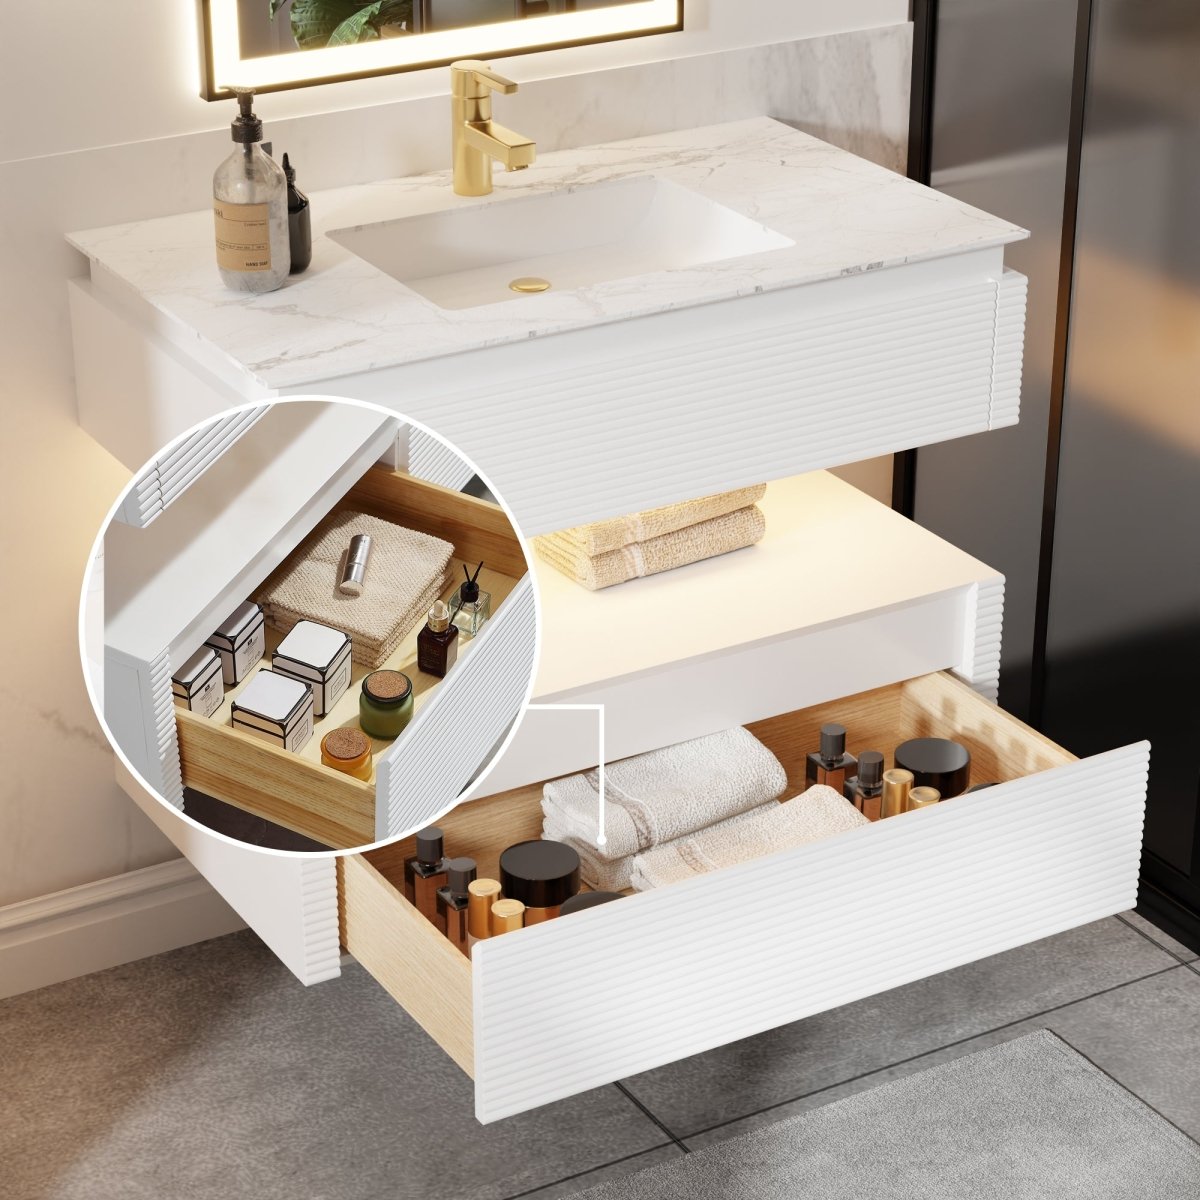 Segeo 36" Modern Solid Oak Floating Bathroom Vanity Cabinet White with Lights and Marble Countertop